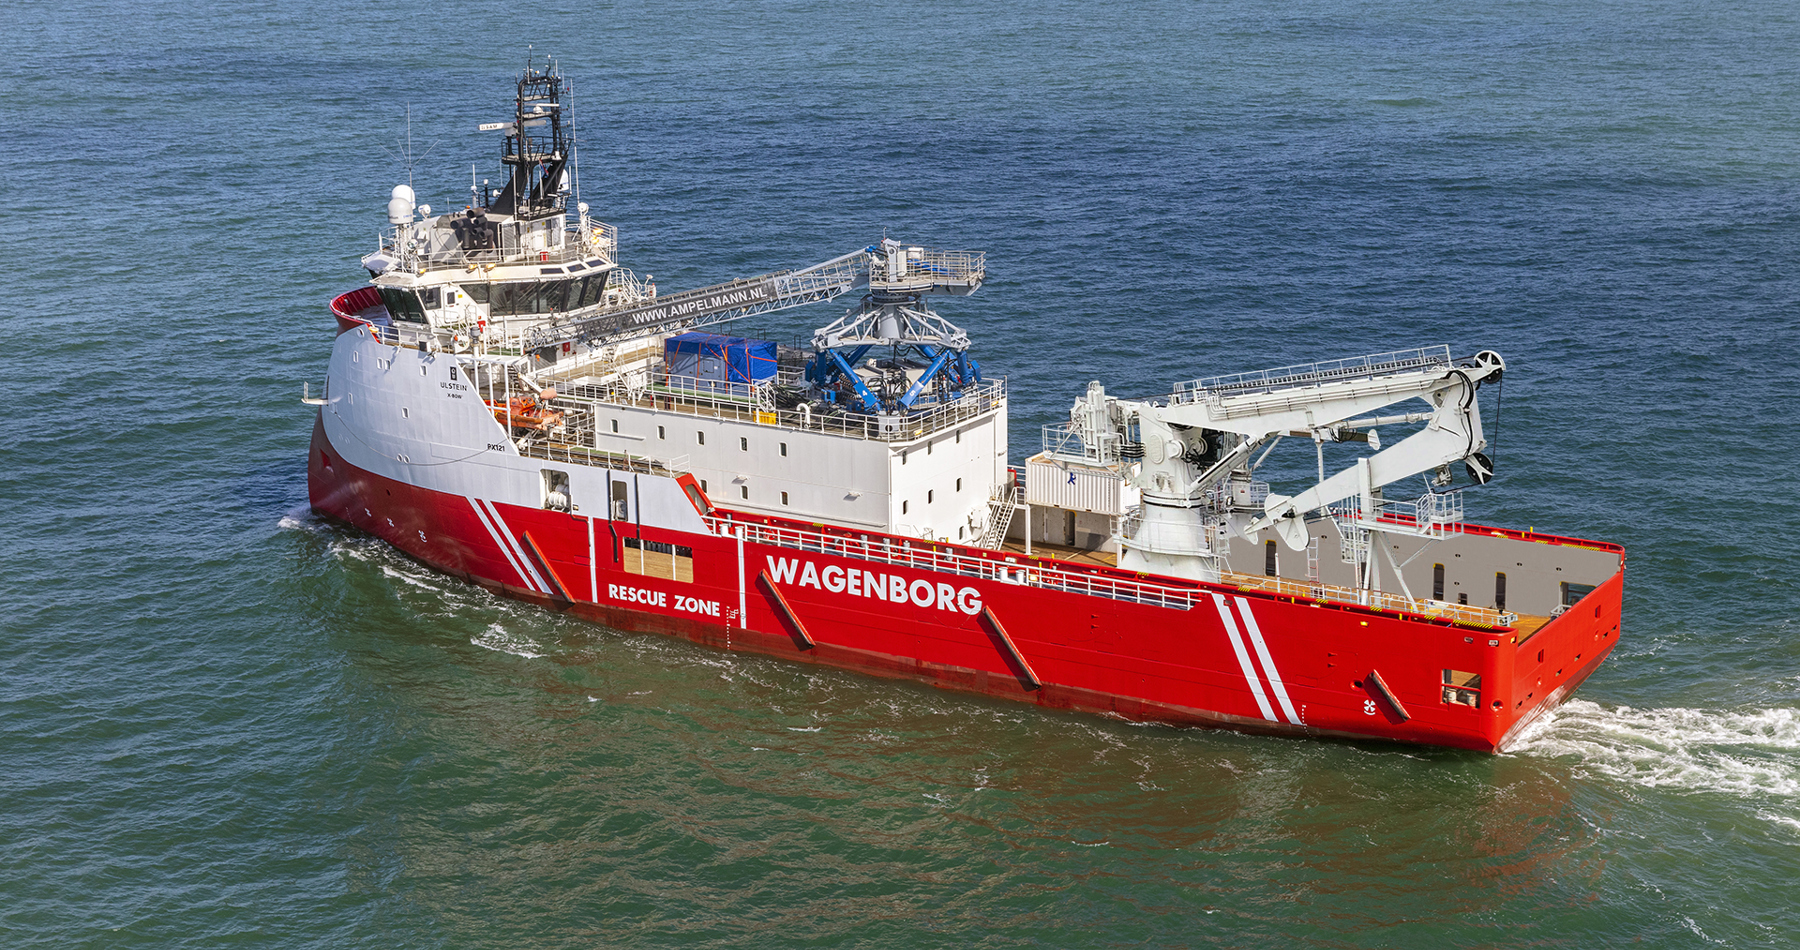 Niestern Sander signs contract for conversion project multipurpose offshore vessel